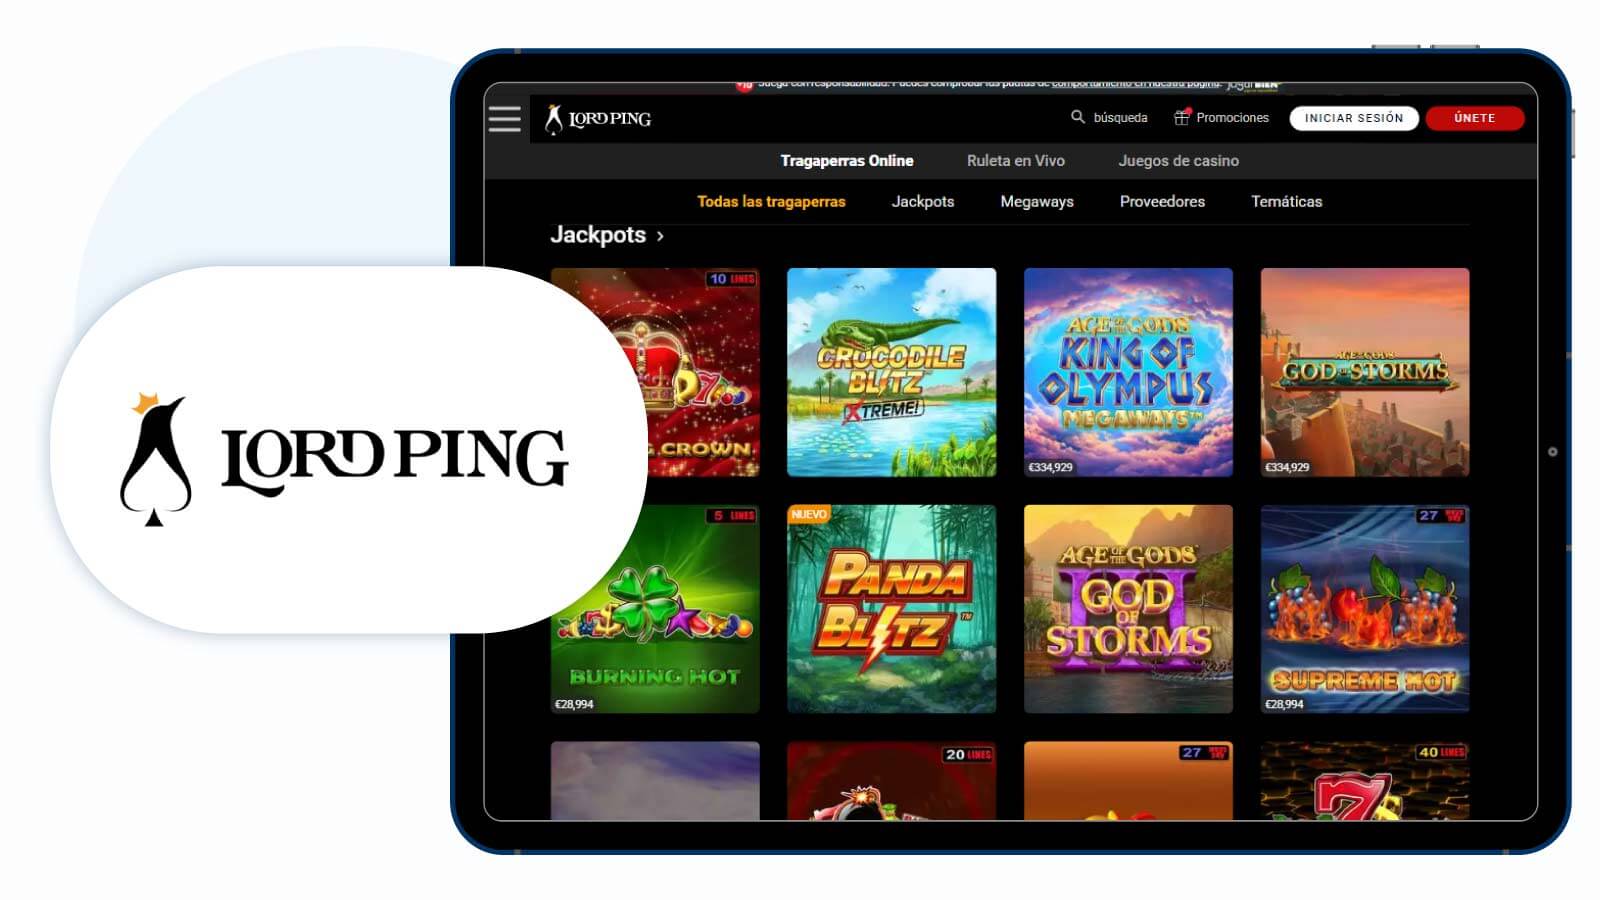 Lord-Ping-Mejor-Nuevo-Casino-online-Apple-Pay